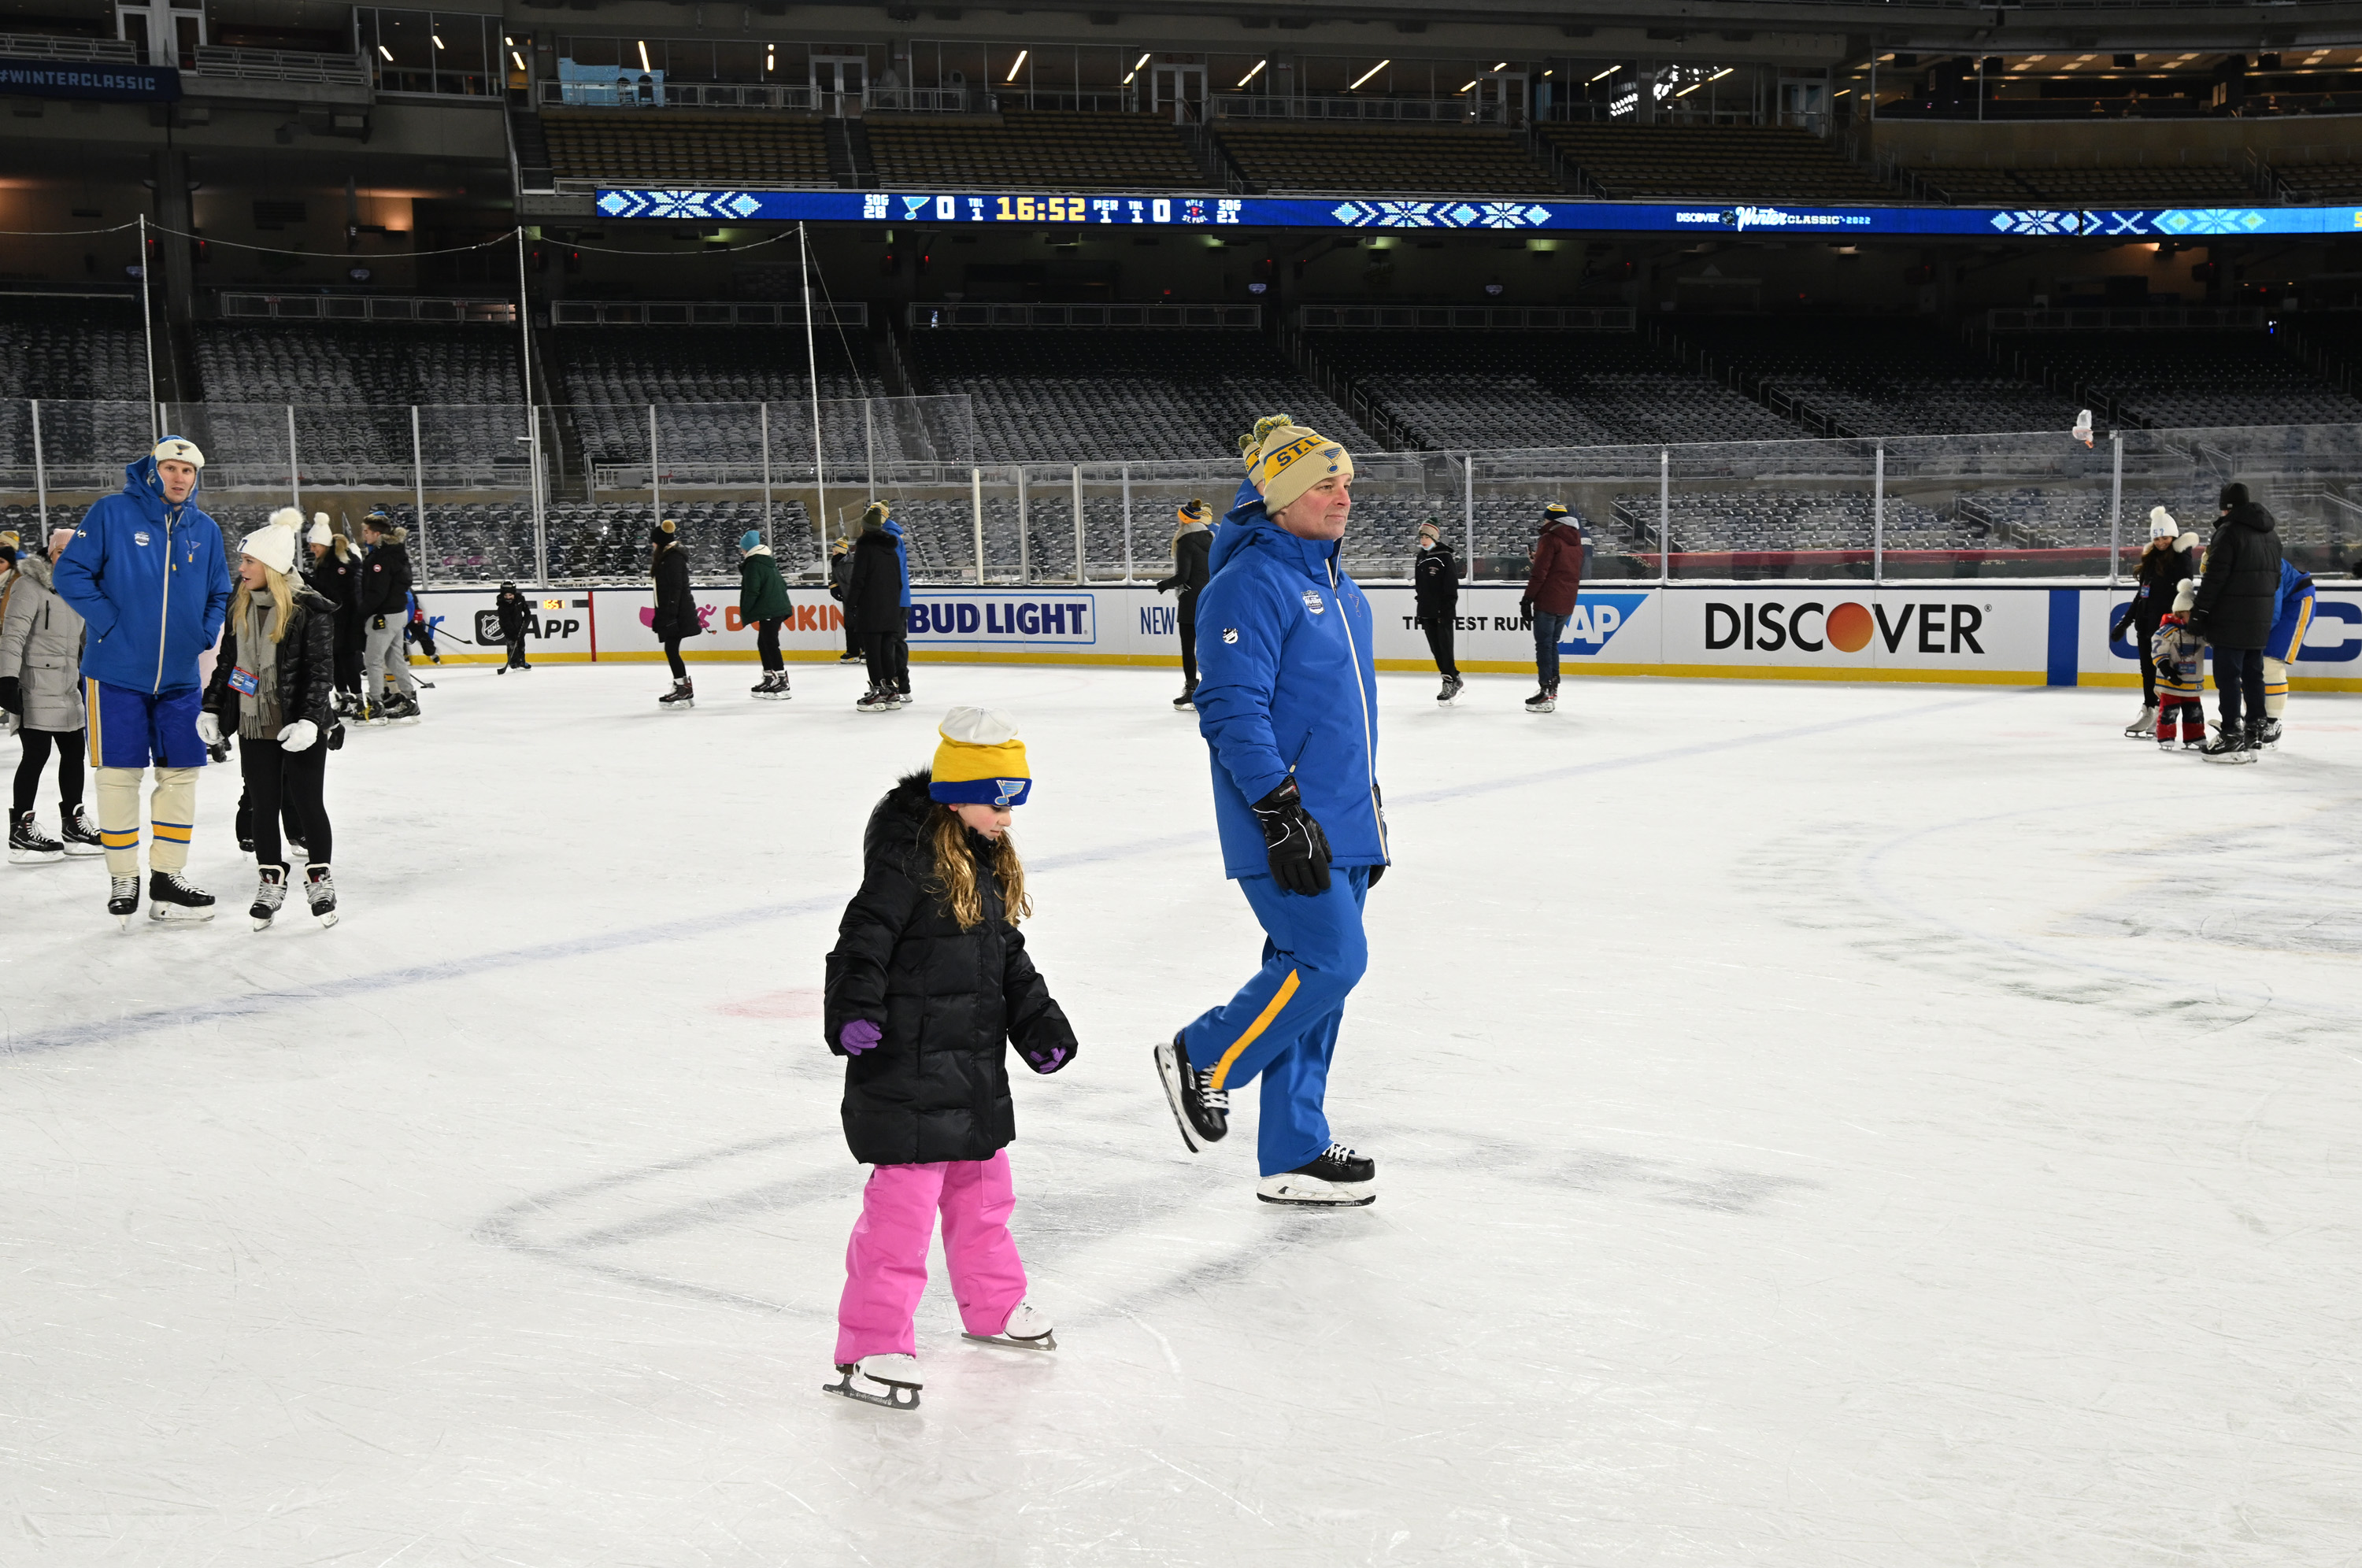 2022 Discover NHL Winter Classic - Practice Sessions &amp; Family Skate